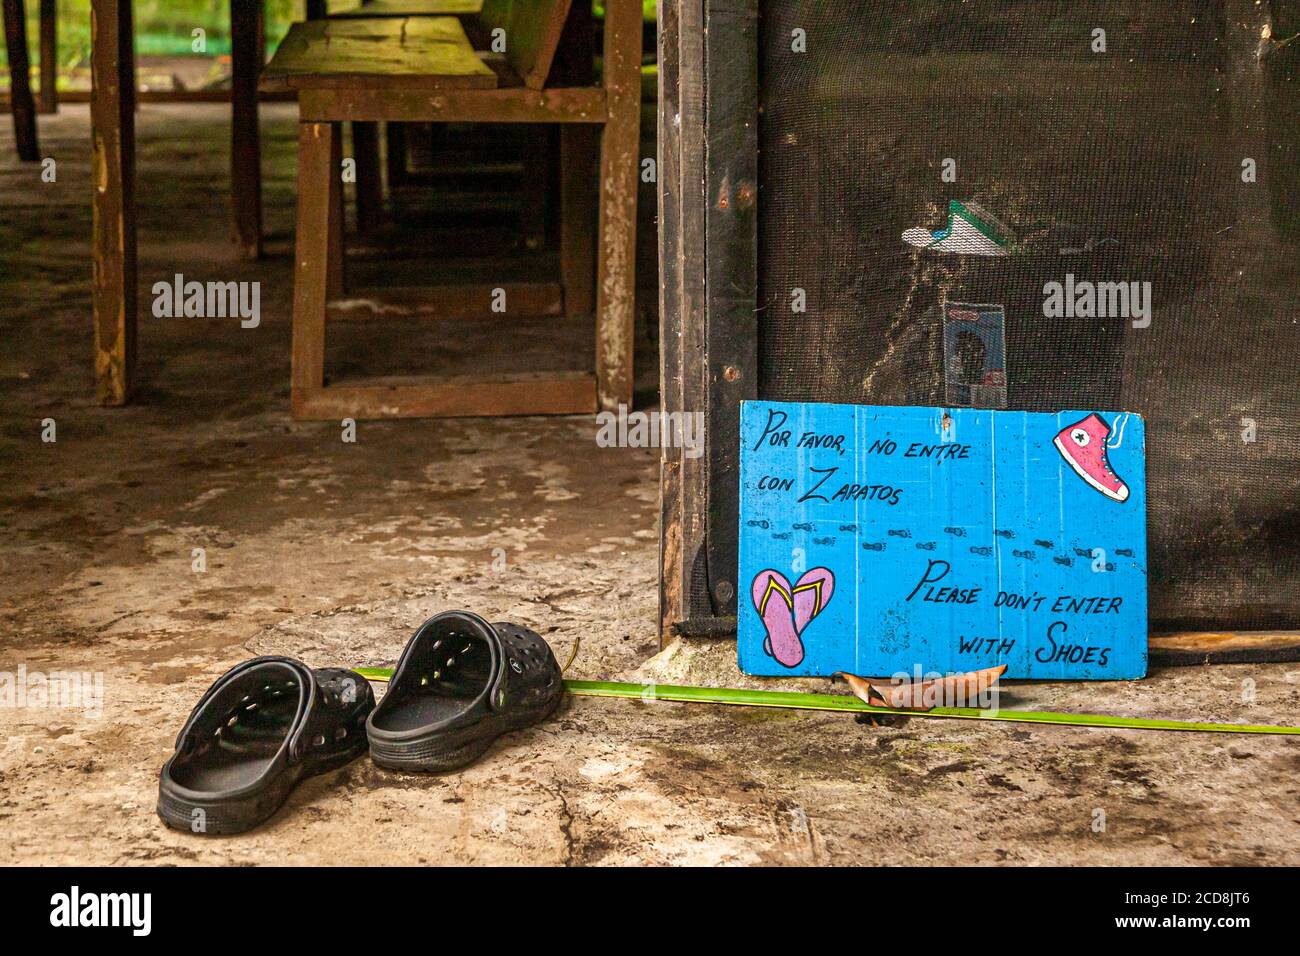 Please take off shoes in Costa Rica Stock Photo